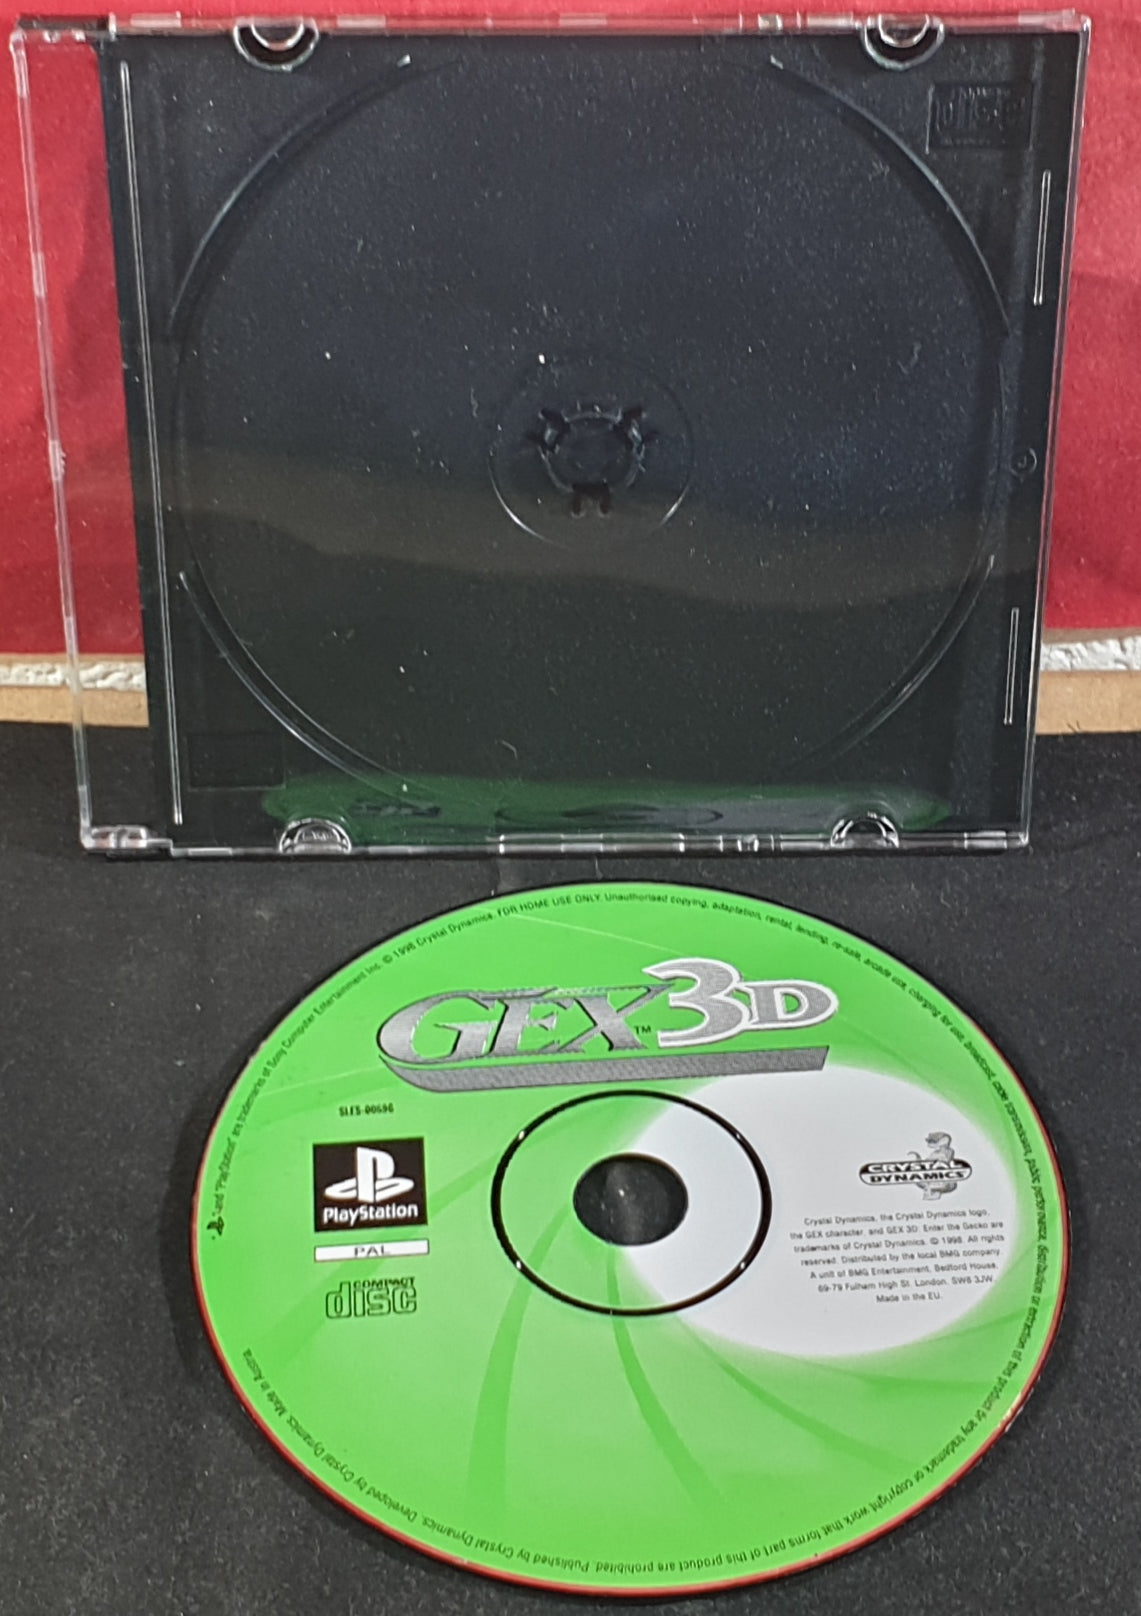 Gex 3D Sony Playstation 1 (PS1) Game Disc Only